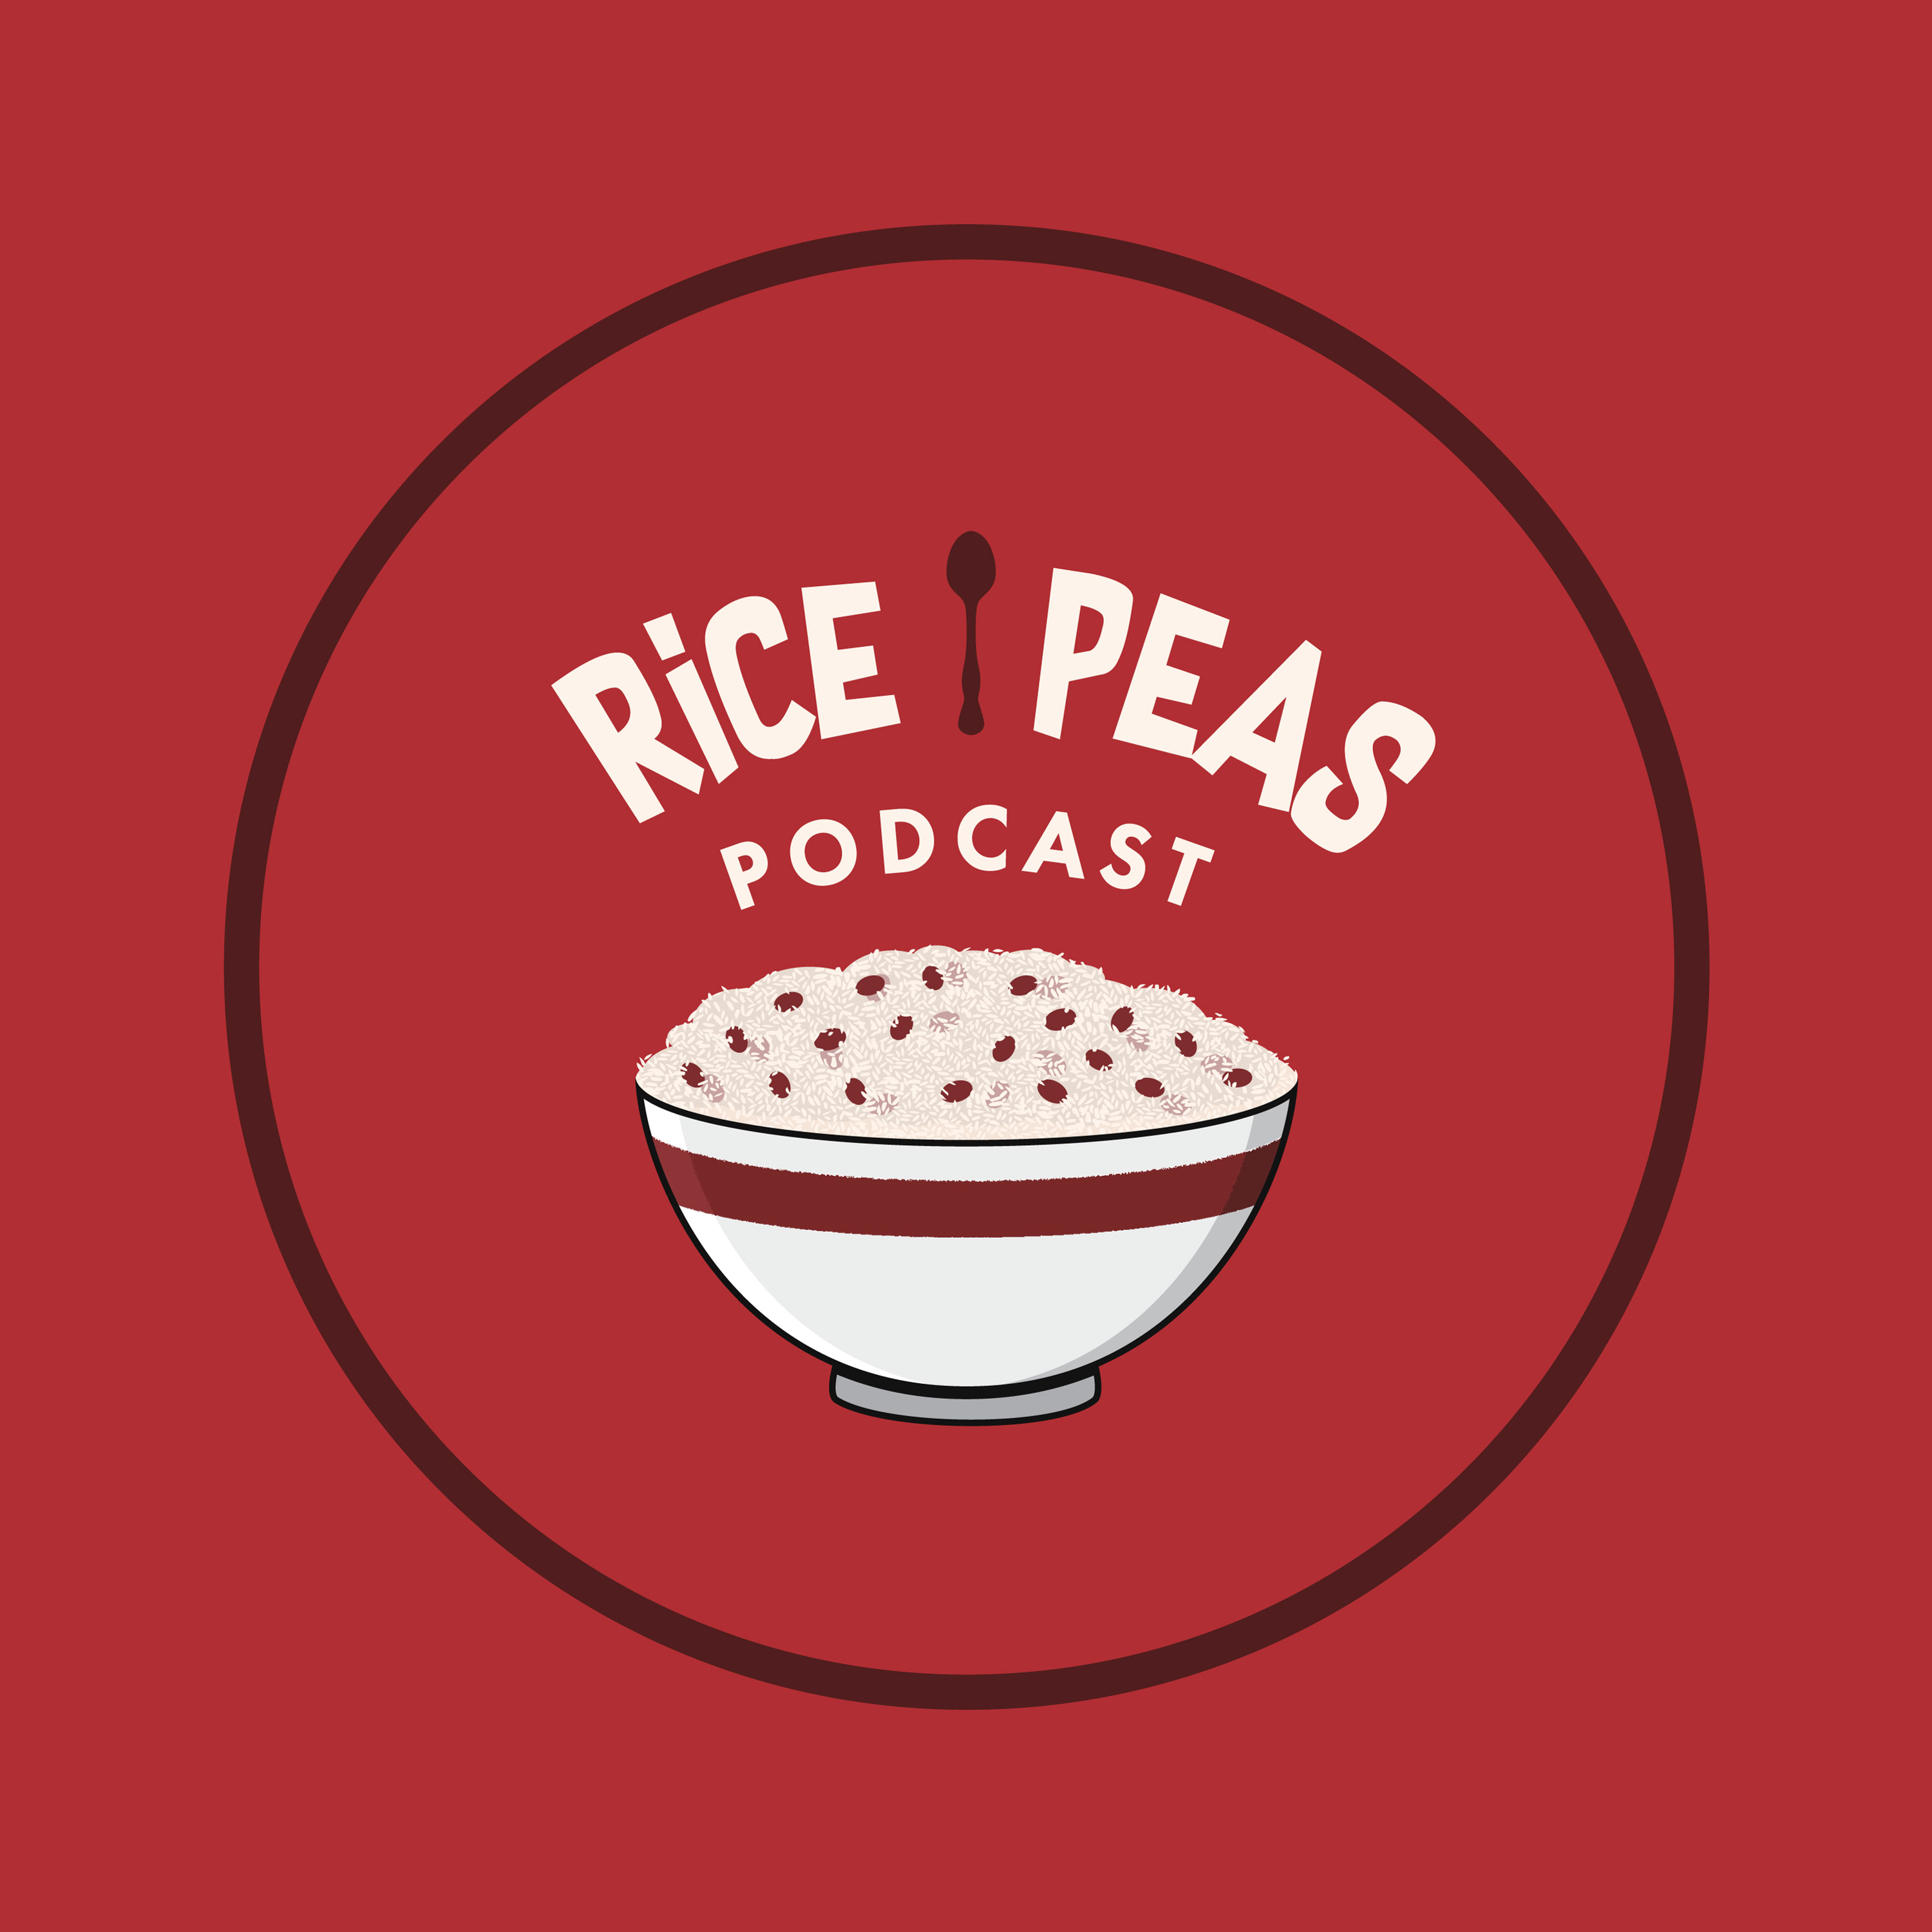 Artwork for podcast The Rice & Peas Podcast